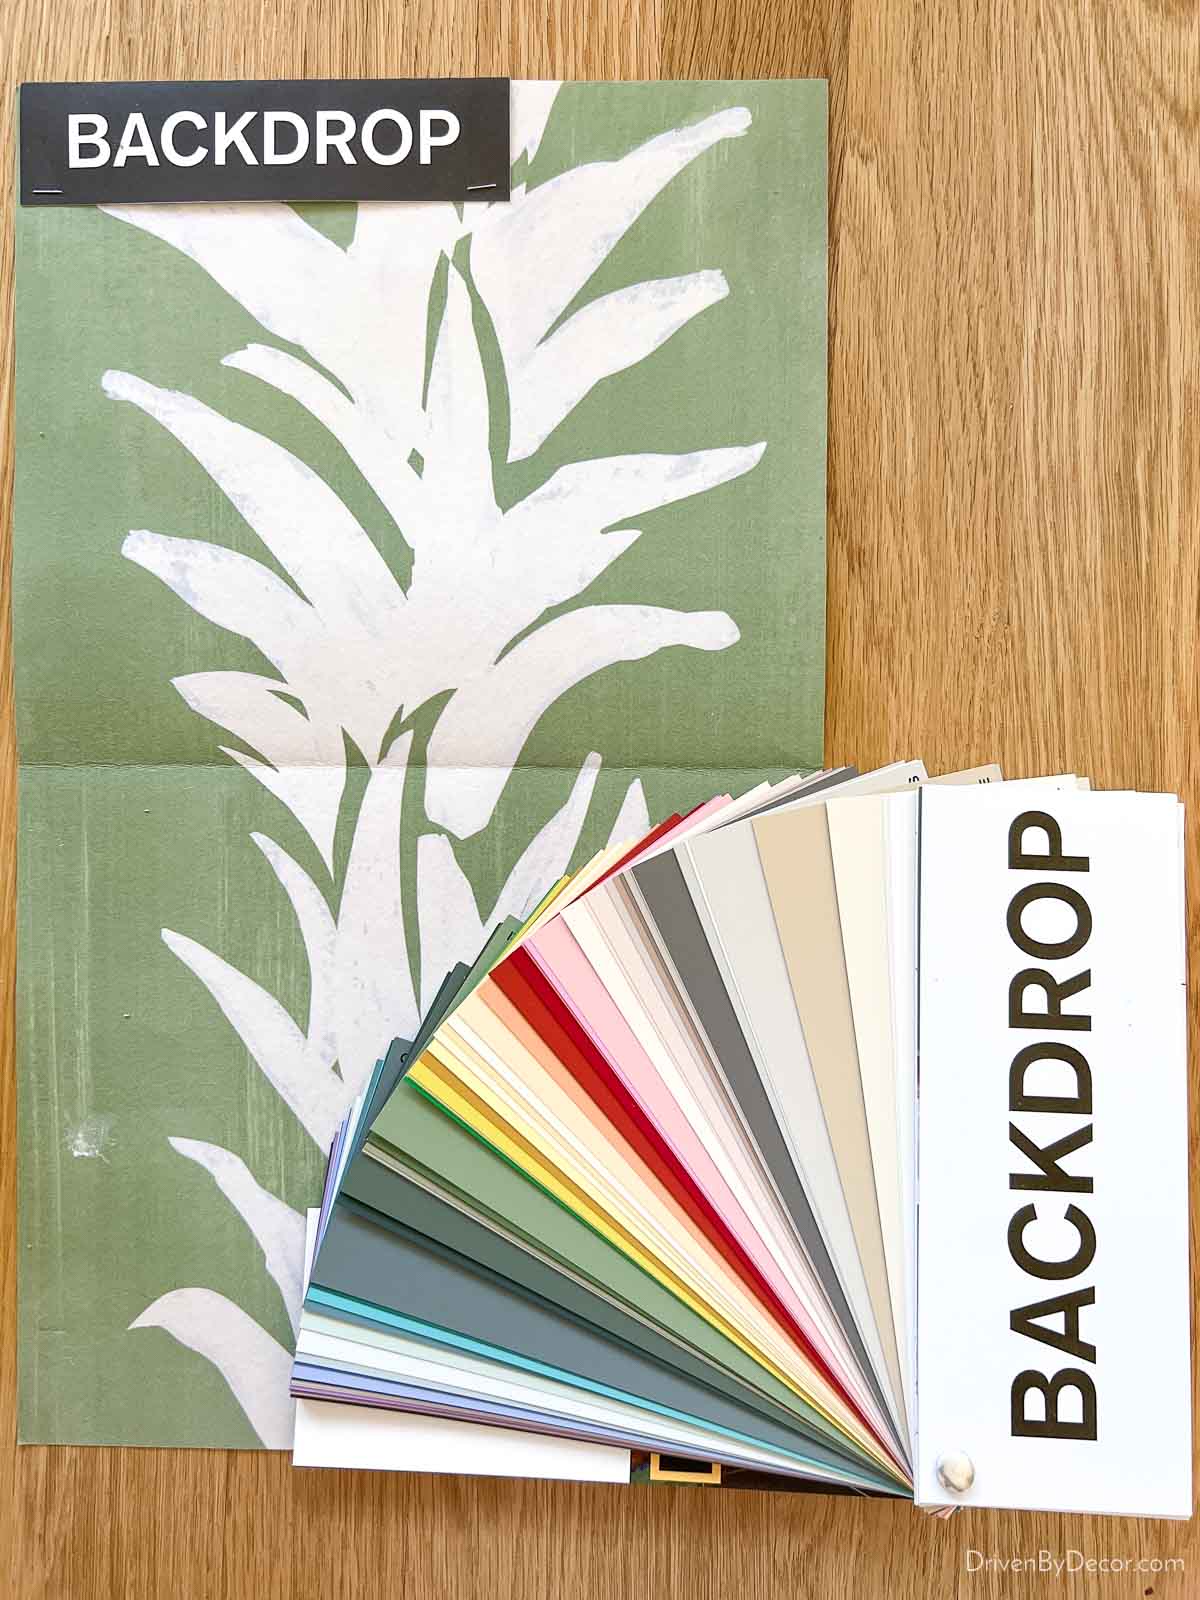 Backdrop paint colors with the green and white wallpaper I ordered